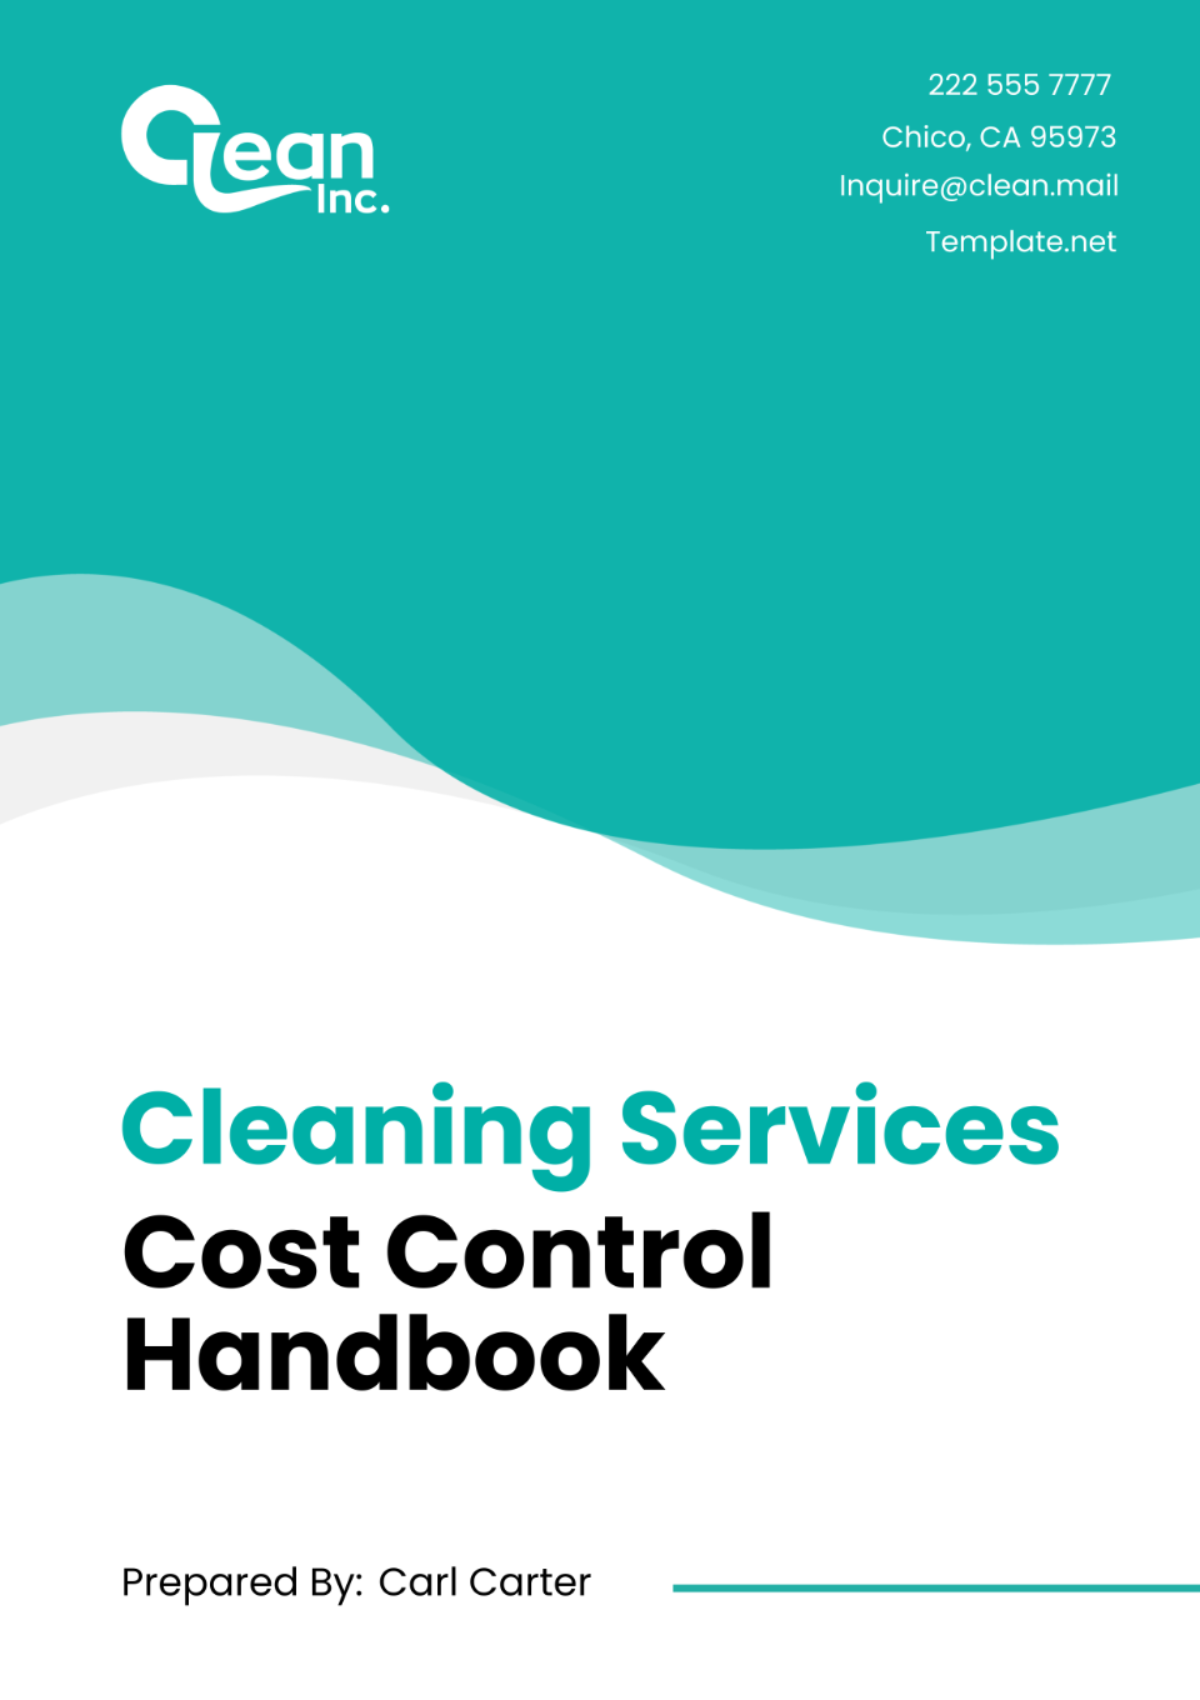 Cleaning Services Cost Control Handbook Template